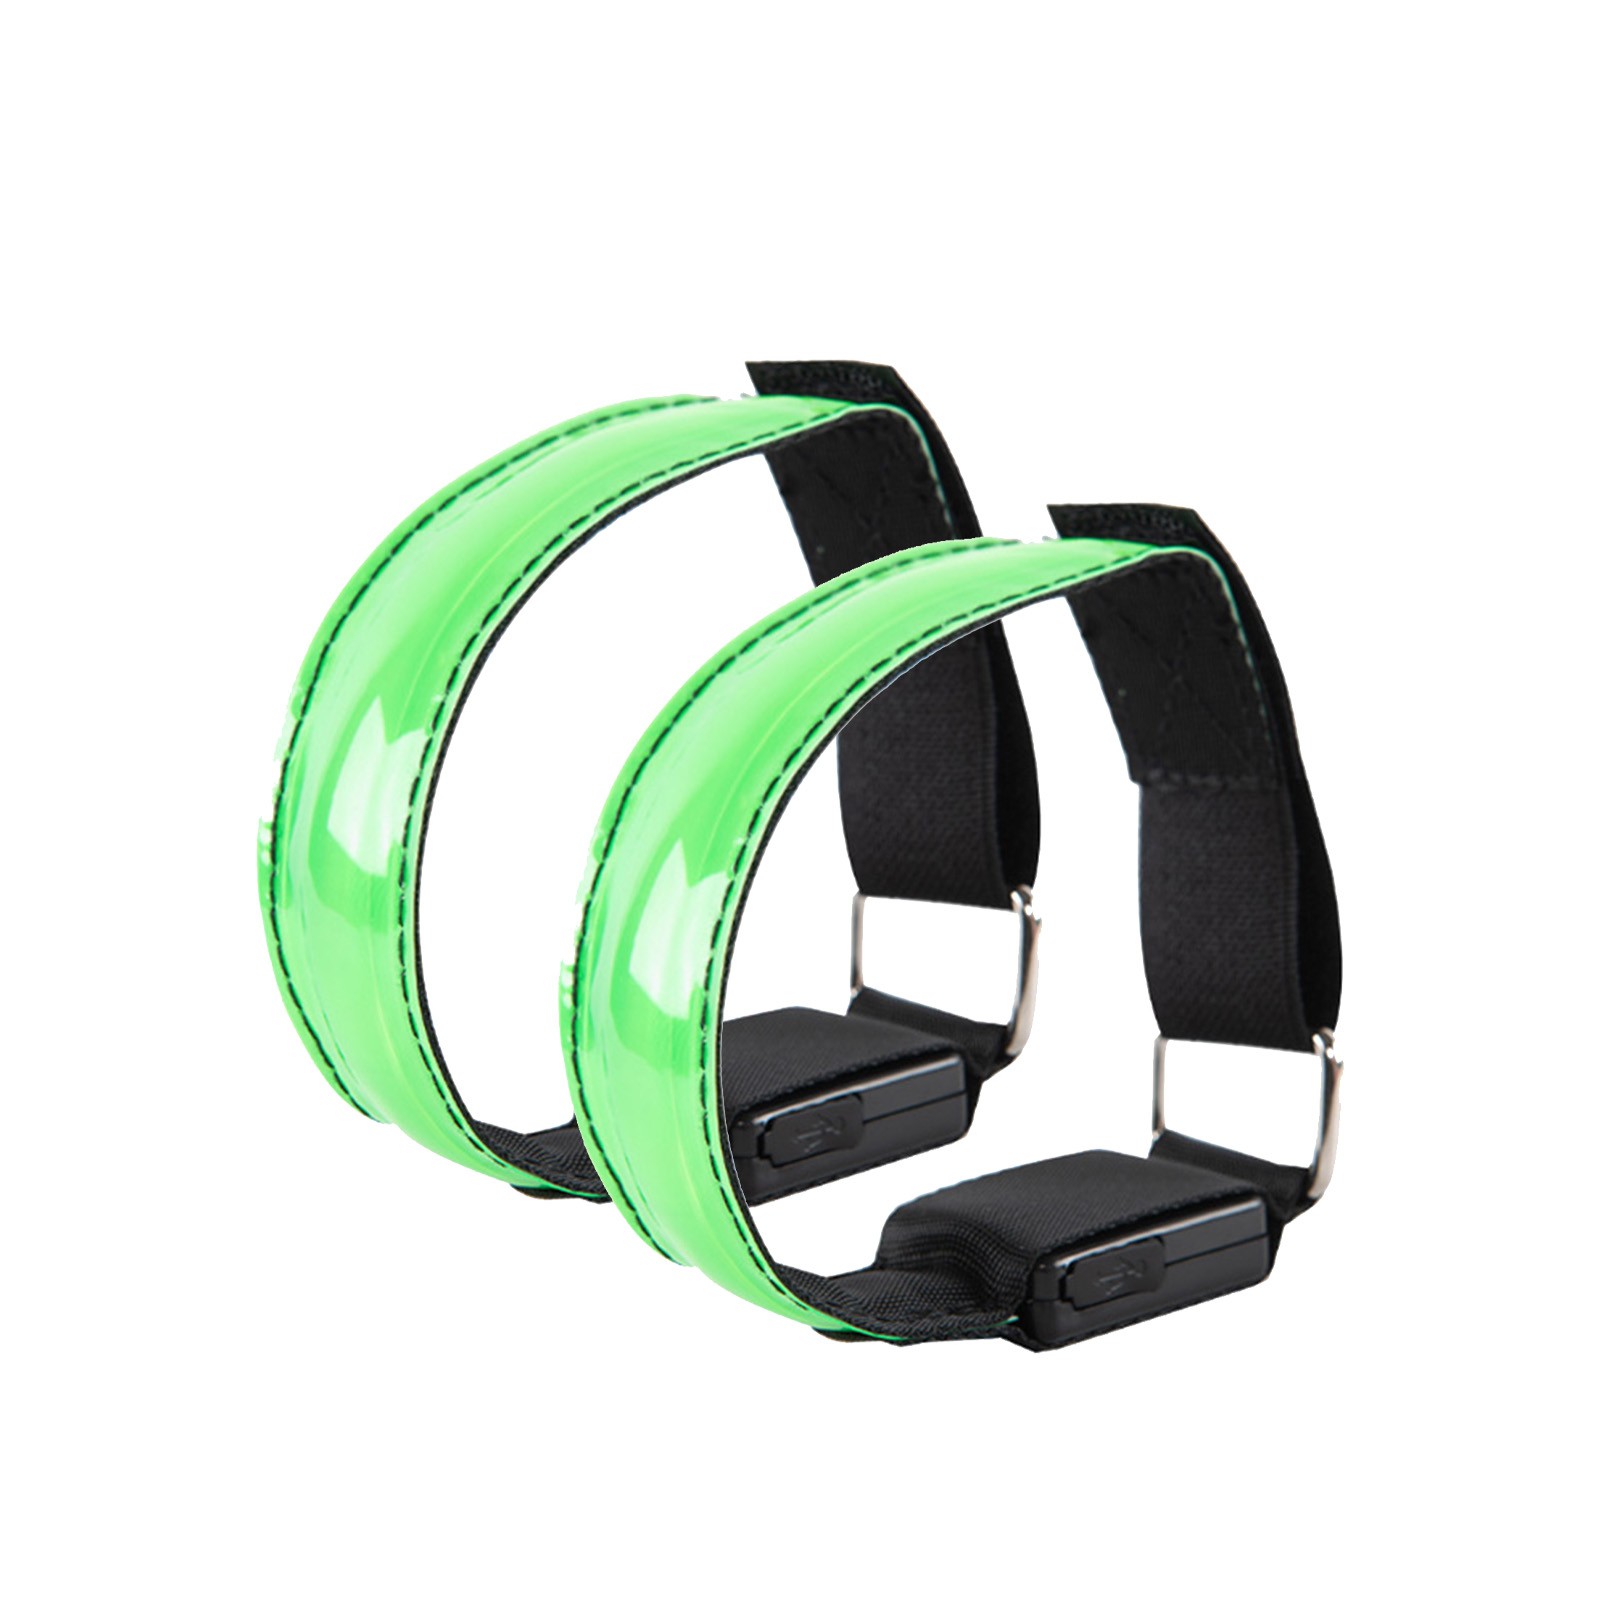 LED Reflective Arm Bands High Visibility Reflective Running Gear USB Rechargeable Armbands For Night Walking 1 Pair